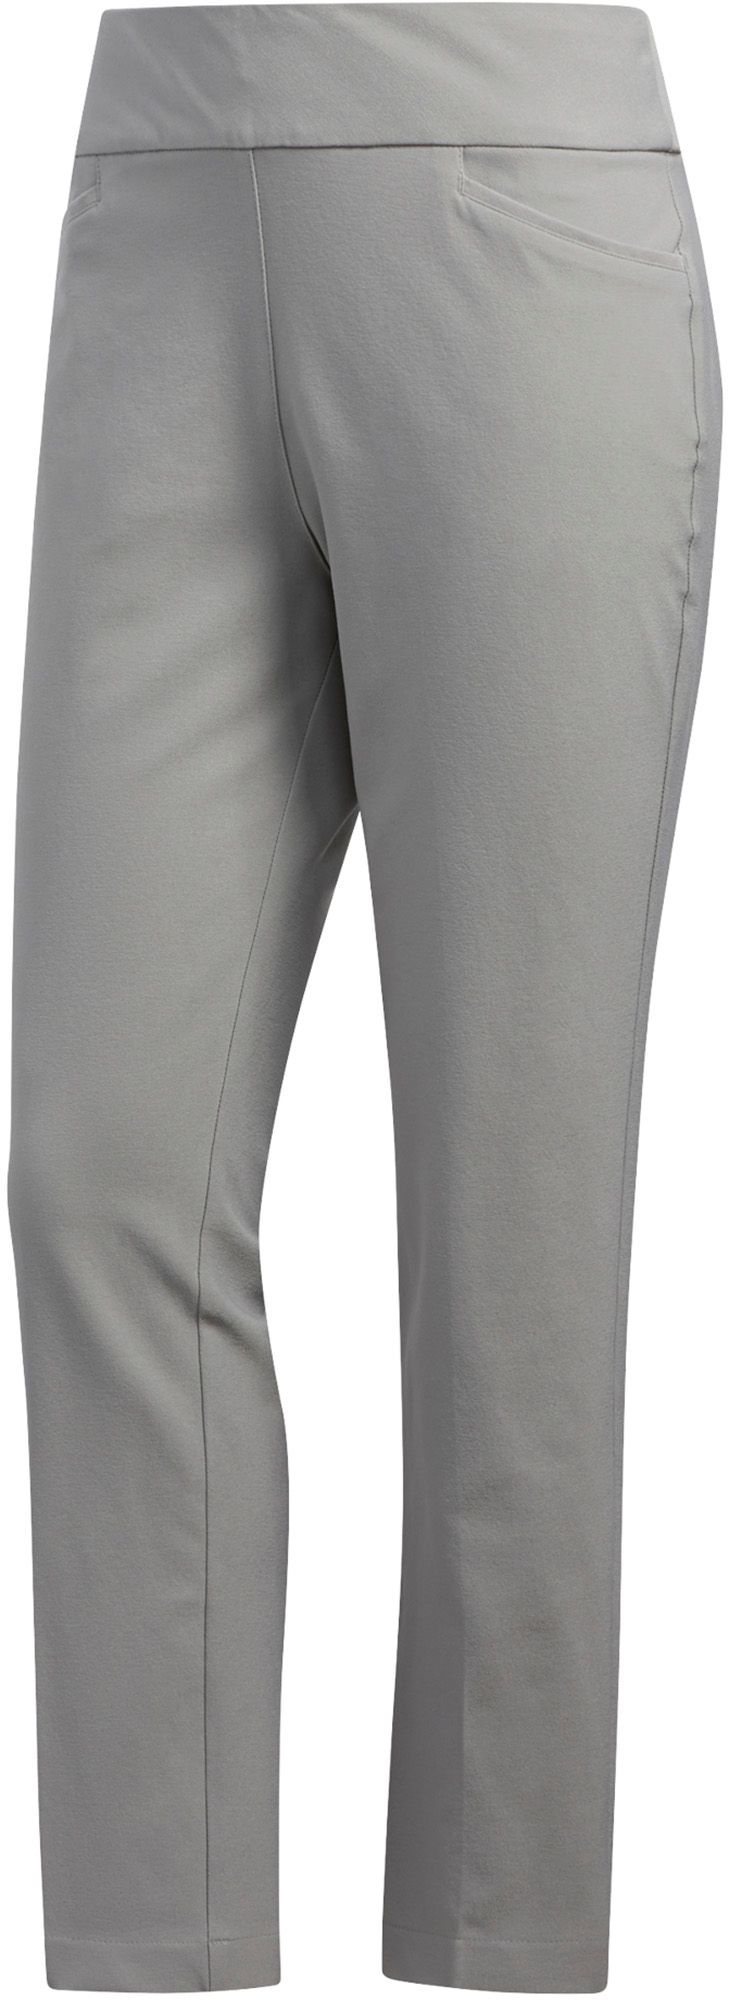 adidas golf women's essentials pull on ankle length pants